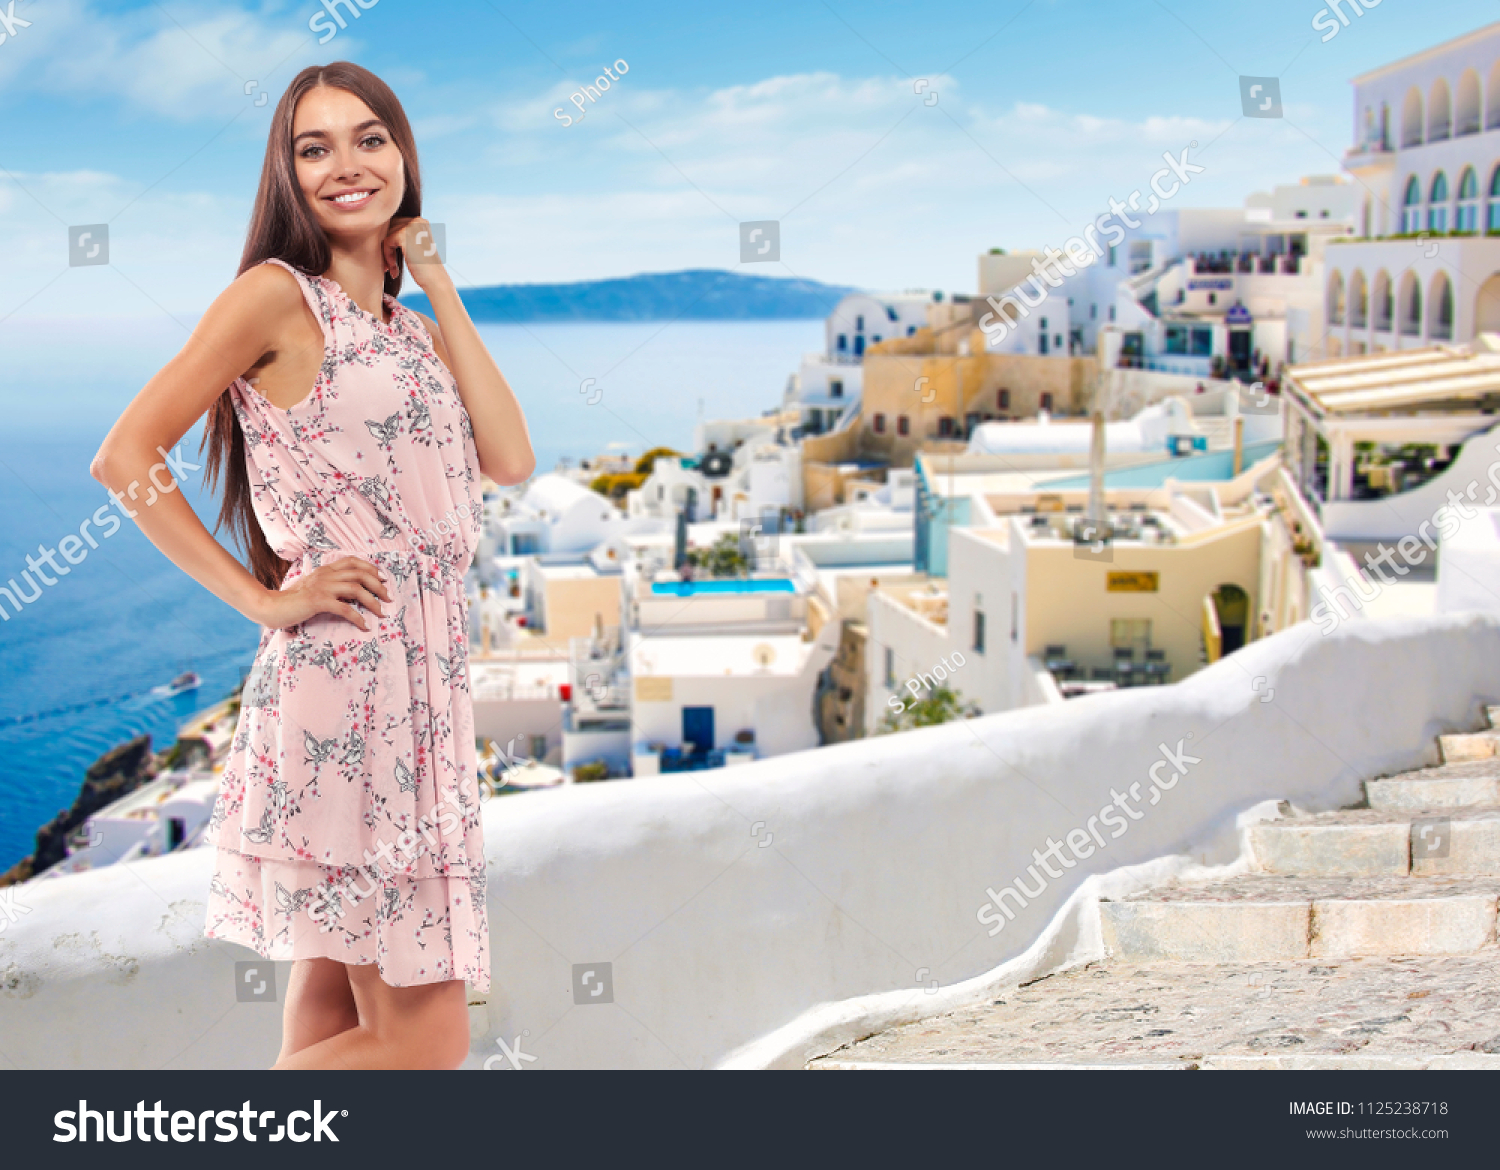 Summer time and woman in Greece  #1125238718